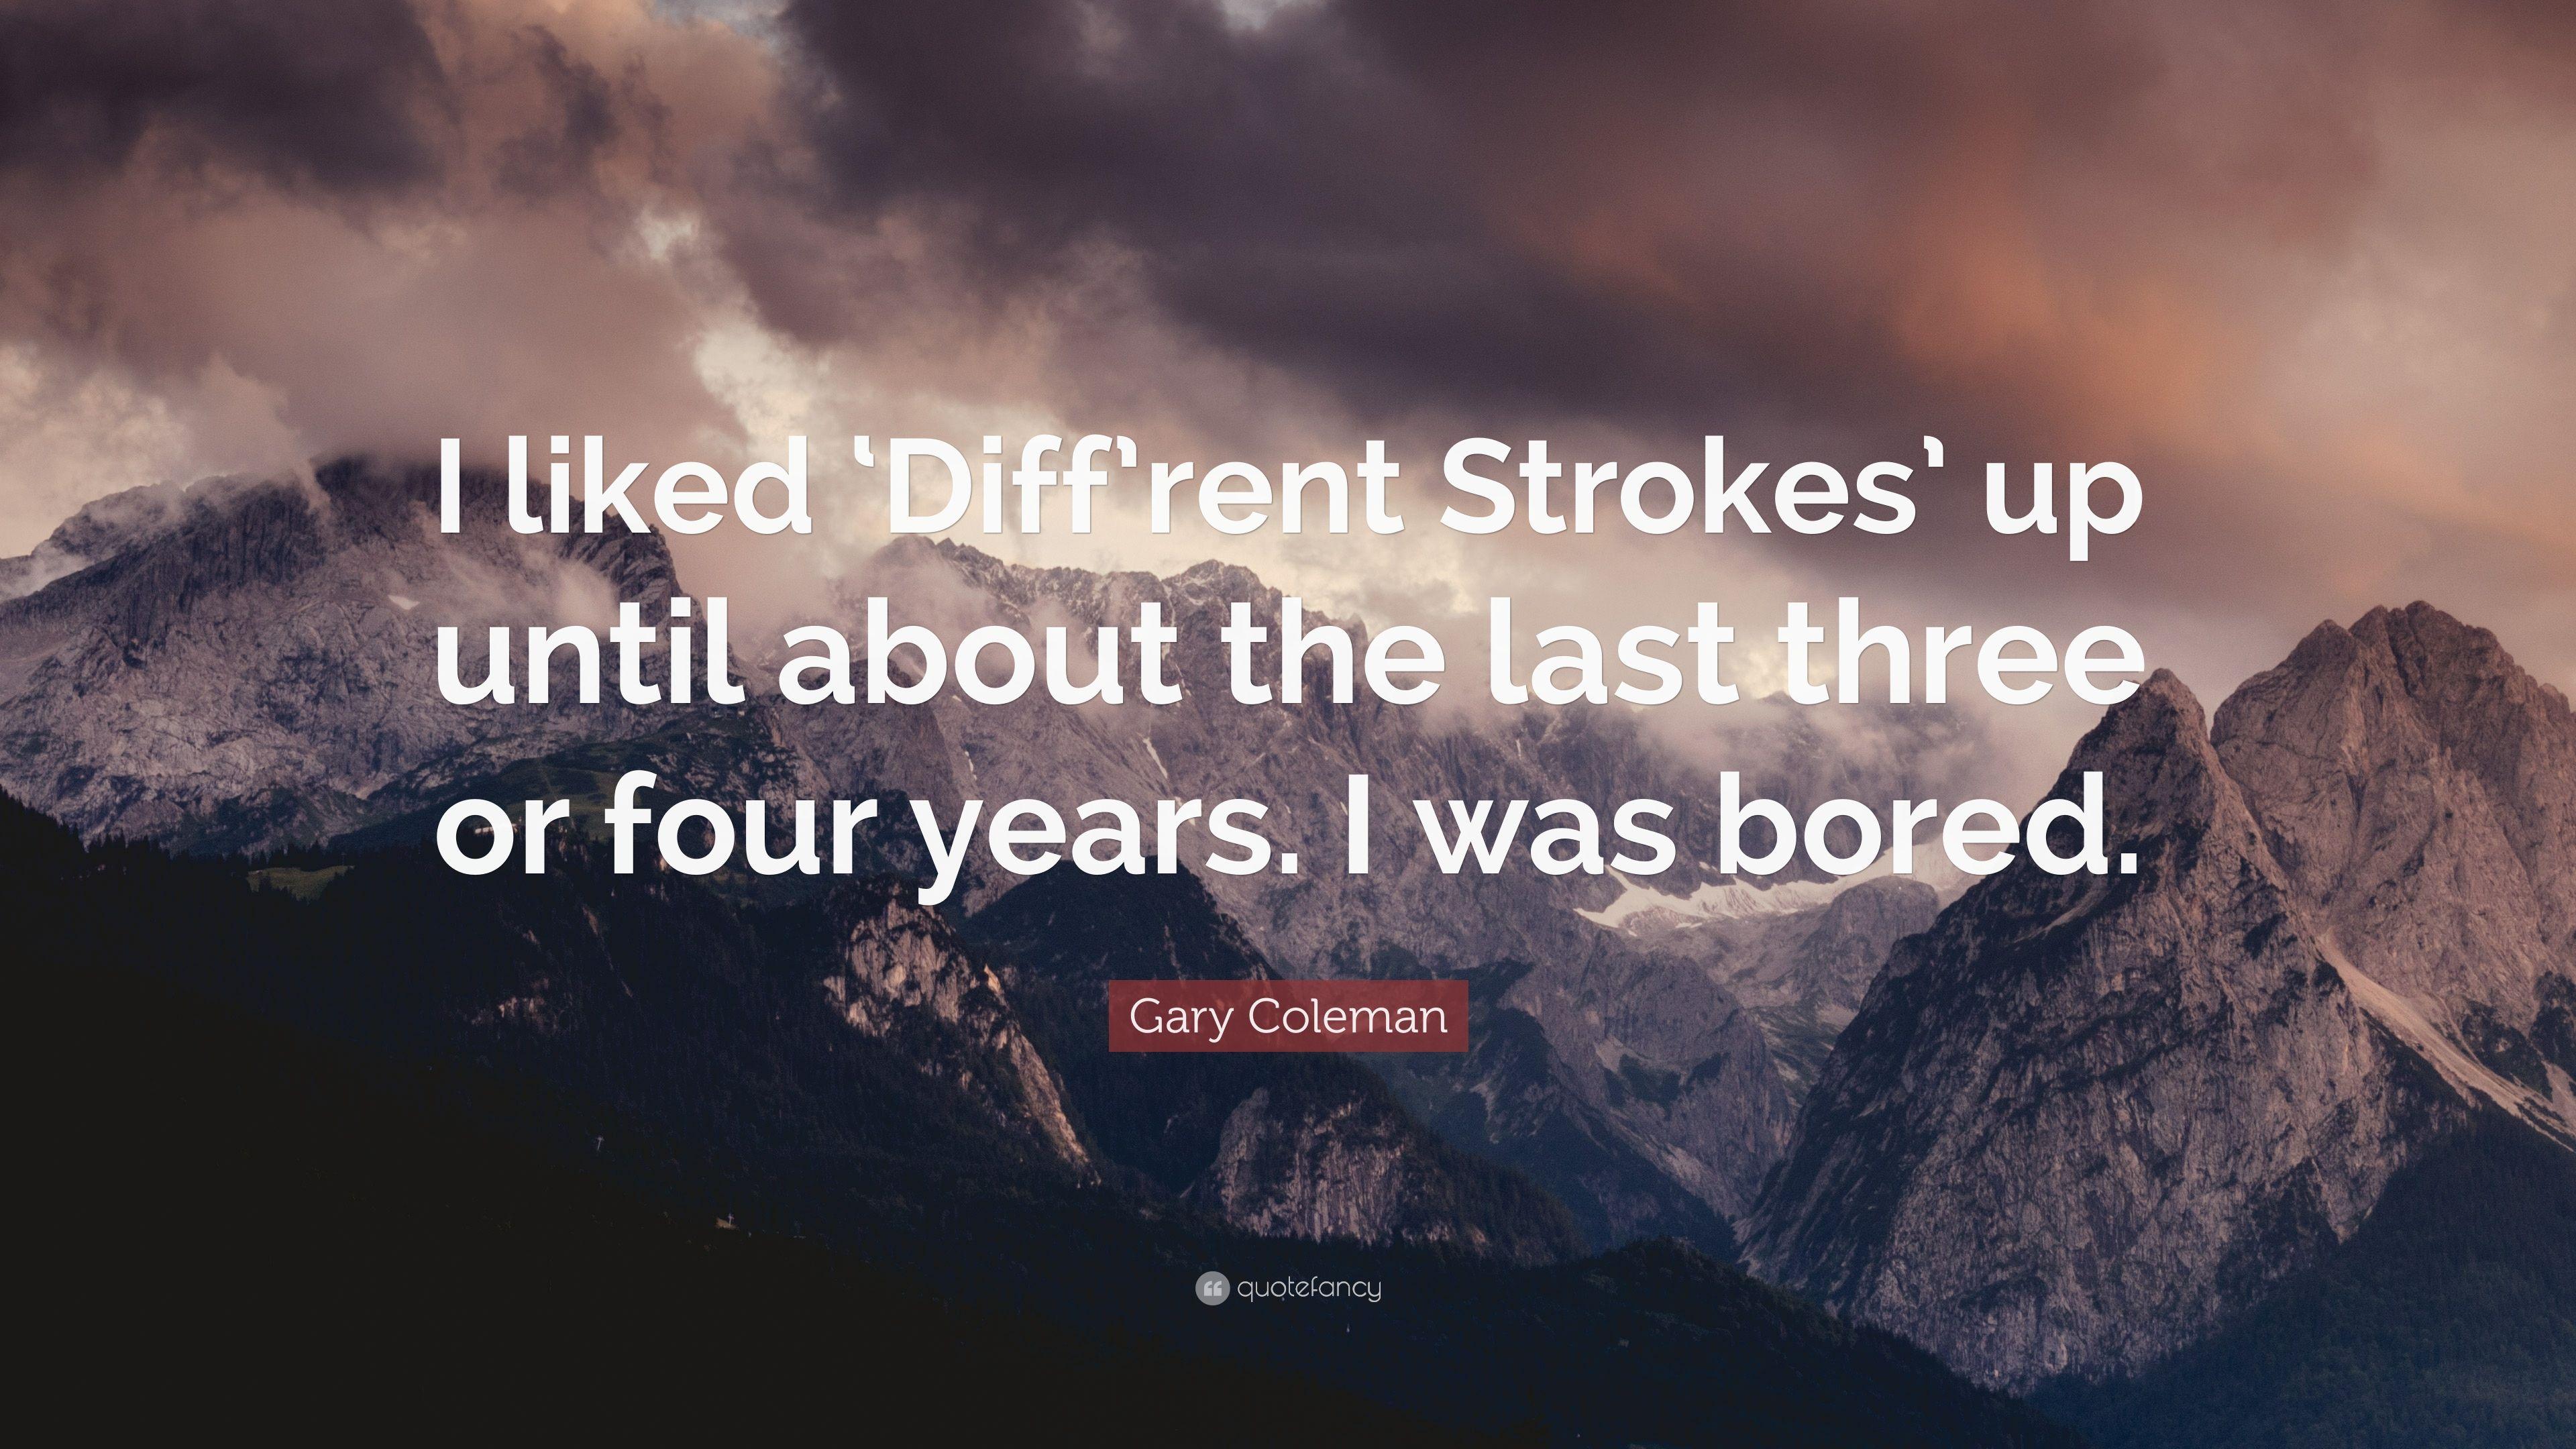 Gary Coleman Quote: “I liked 'Diff'rent Strokes' up until about